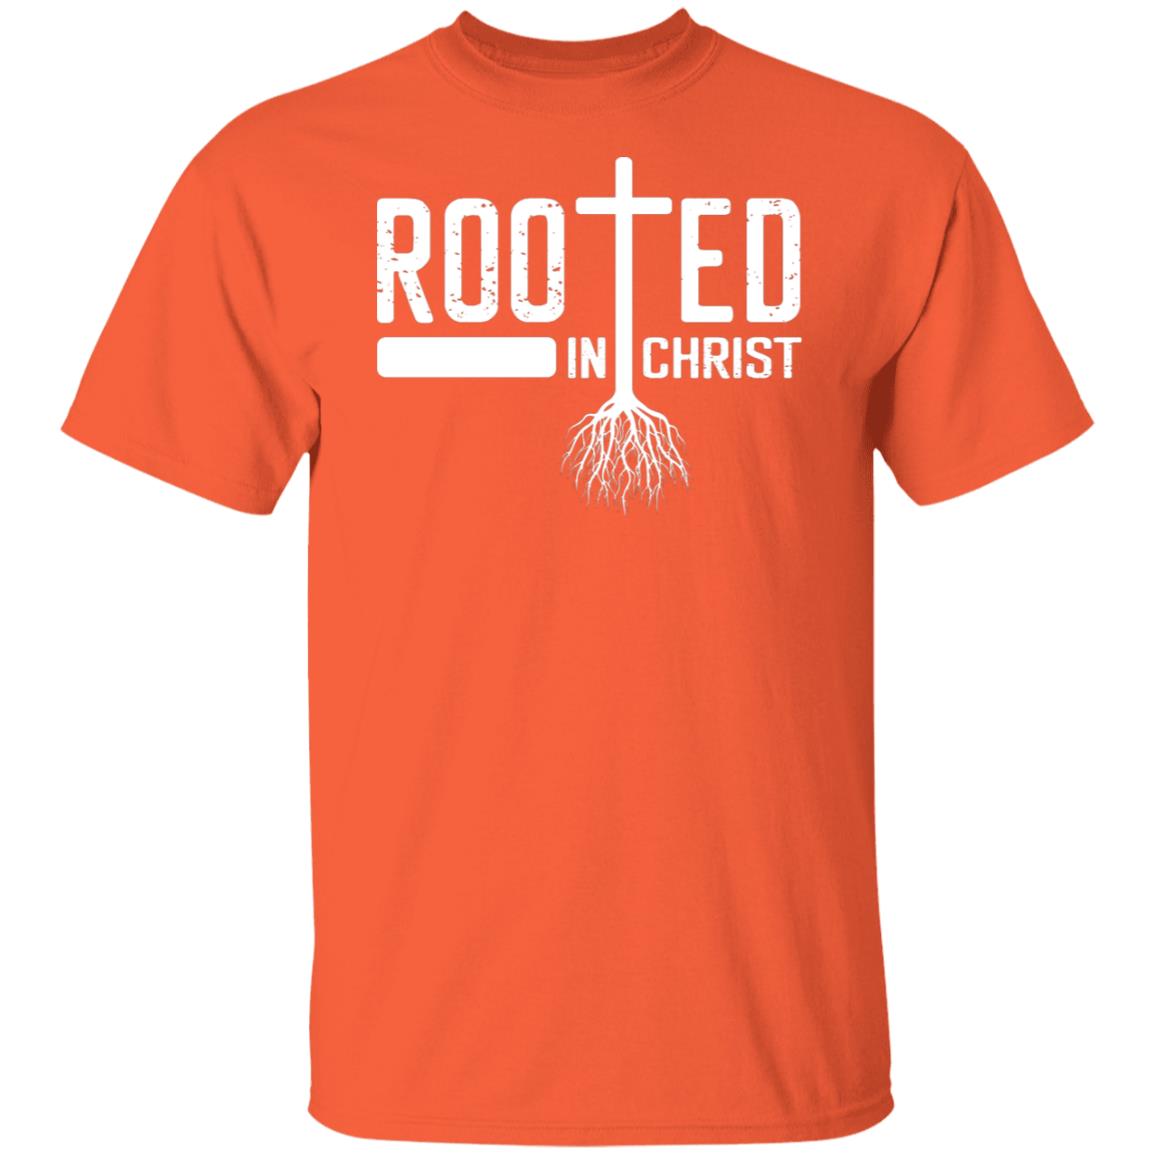 Rooted In Christ Tshirt